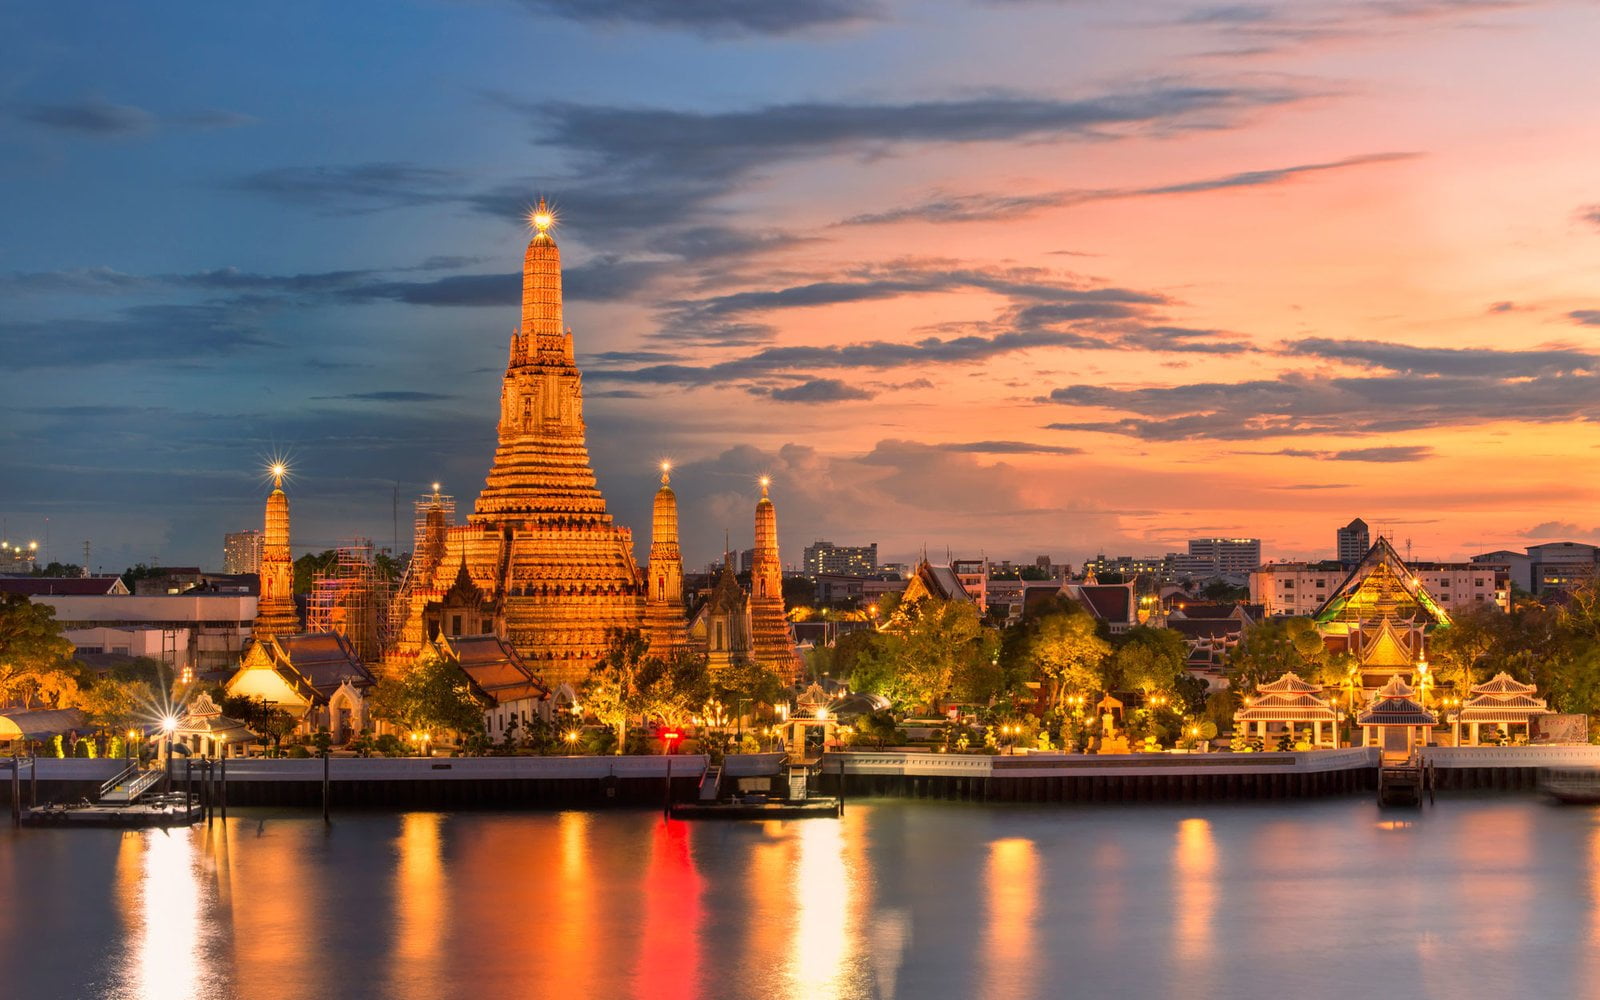 Bangkok's Revenue Department will use Blockchain Technology to Prevent Tax Evasion